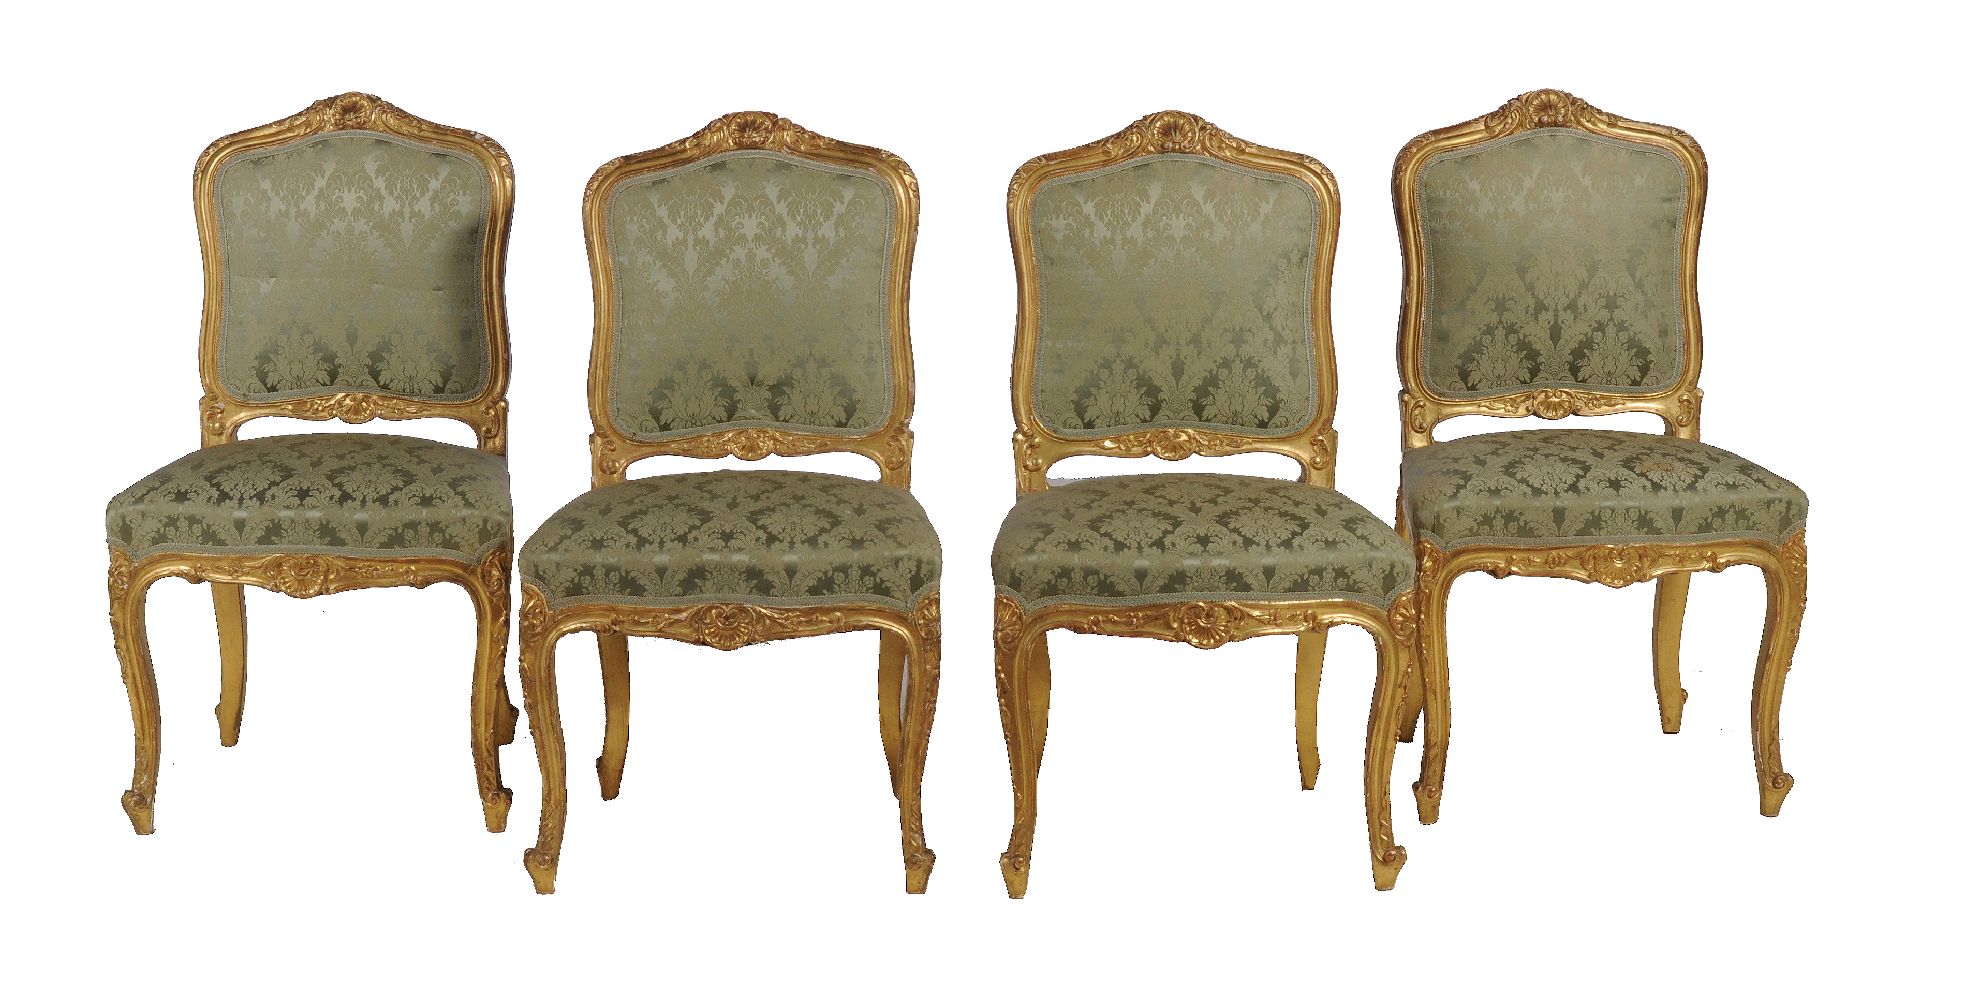 A set of four carved giltwood side chairs in Louis XV style